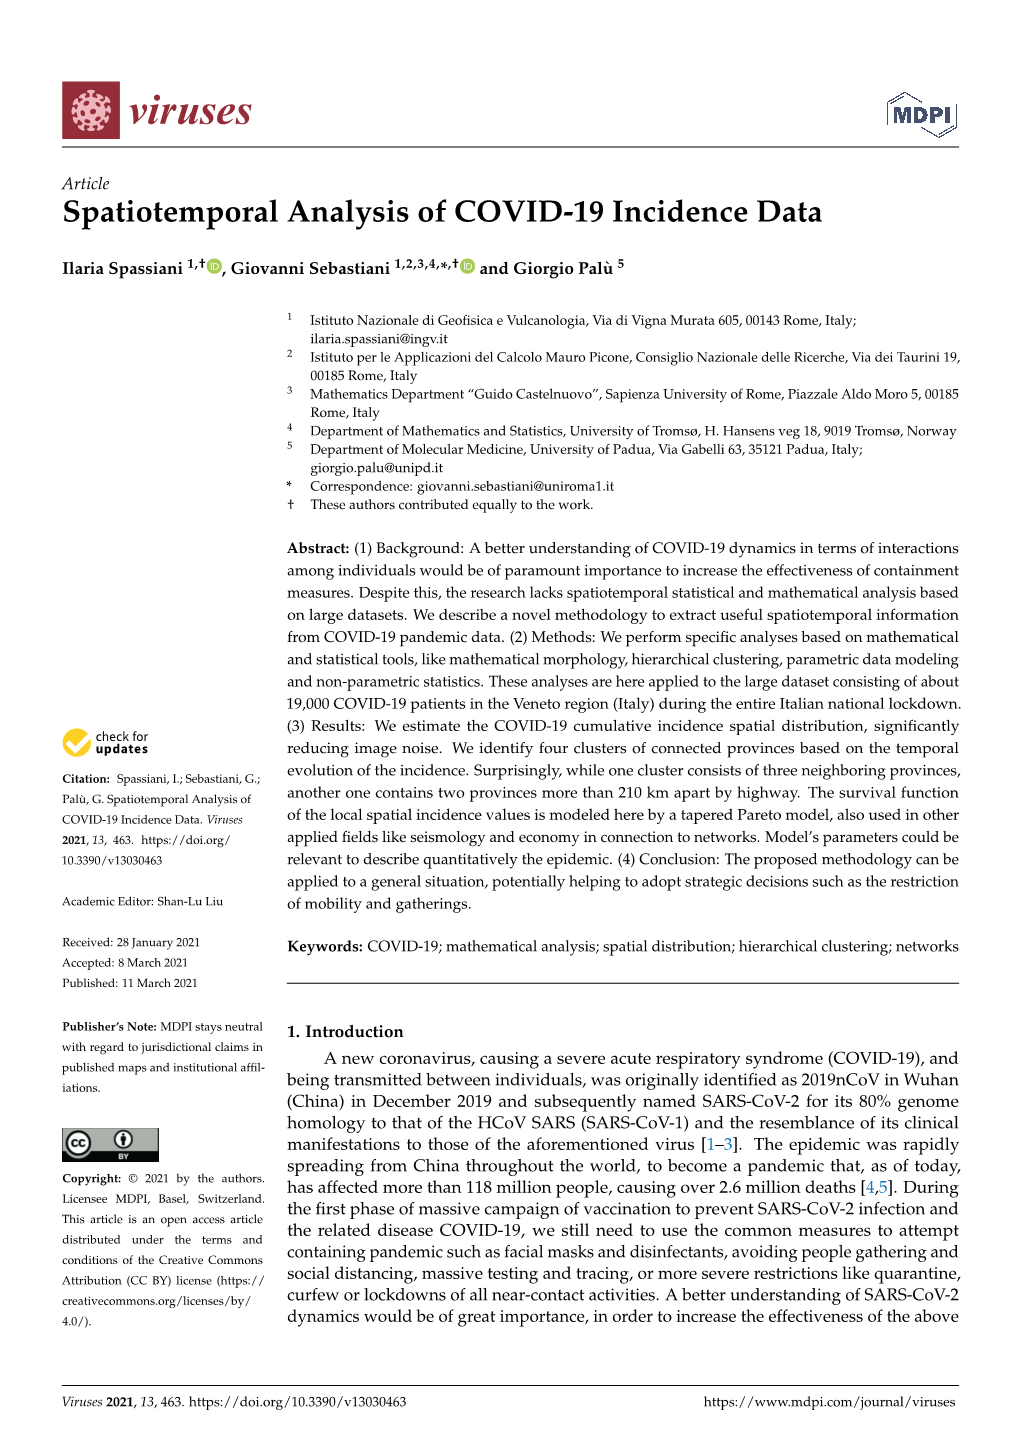 Spatiotemporal Analysis of COVID-19 Incidence Data